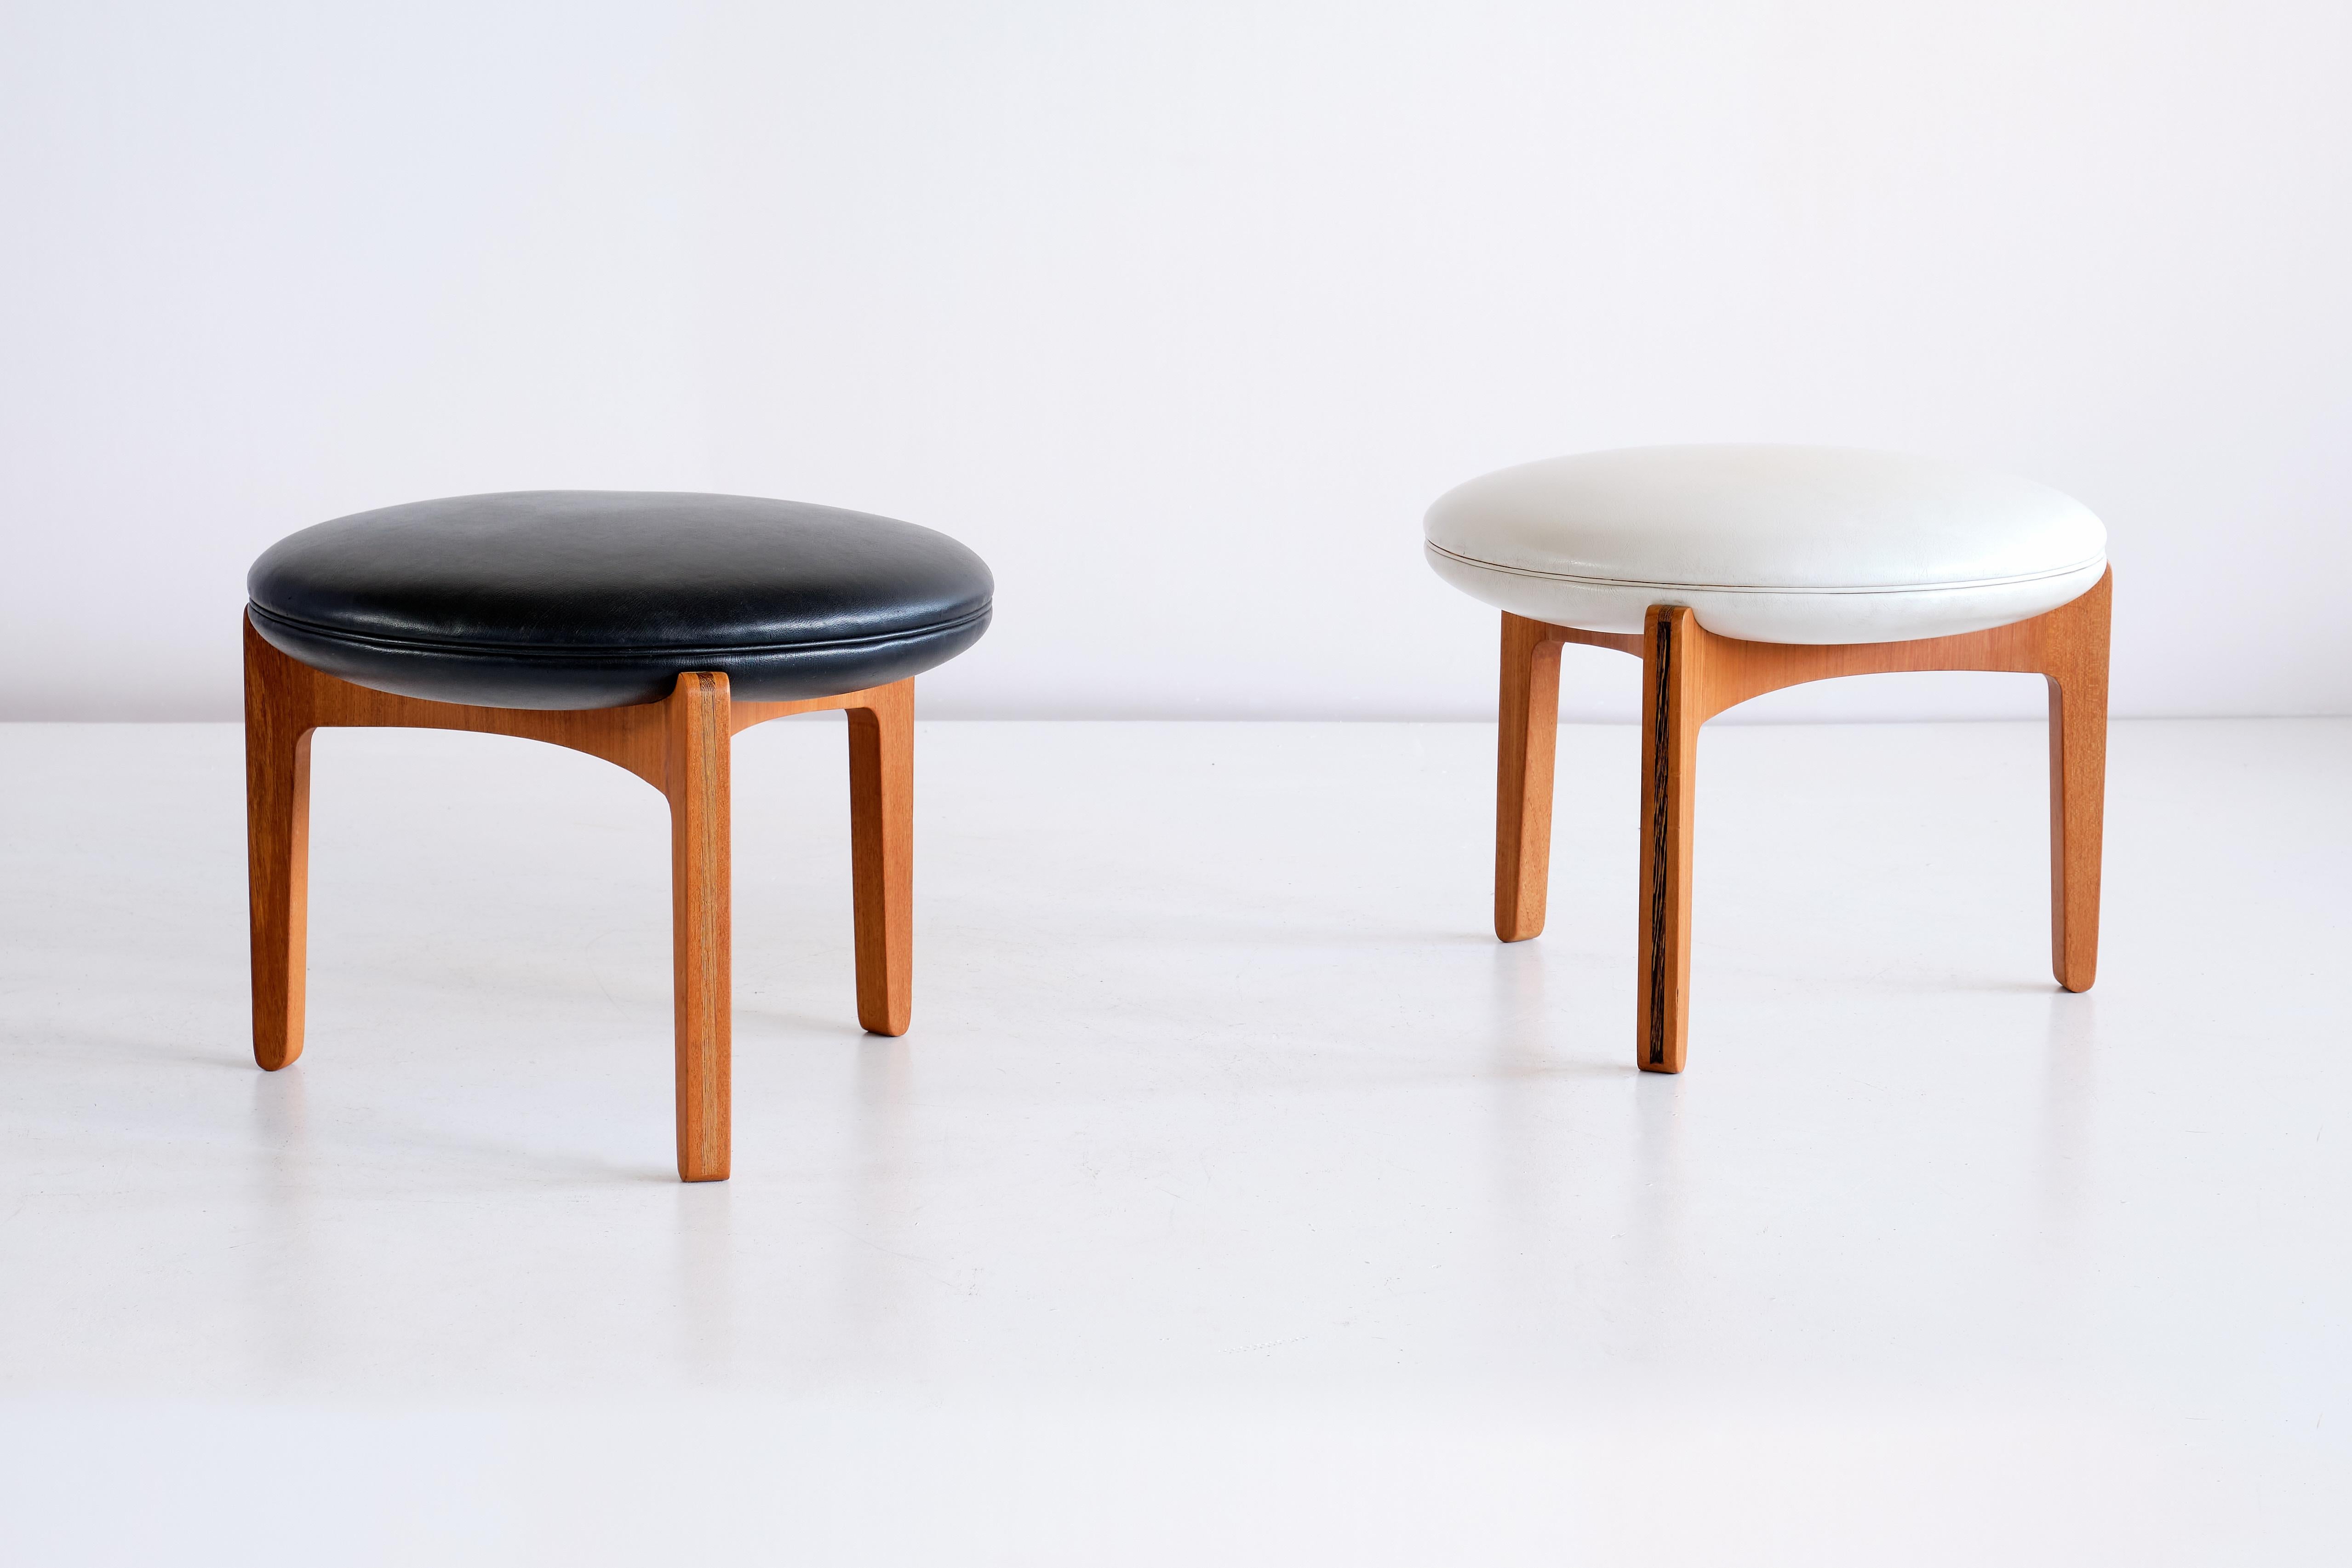 This striking pair of stools was designed by Sven Ellekaer and produced by Christian Linneberg Møbelfabrik in Denmark, 1962. The round seat pads are upholstered in a black and white vinyl leather, resting on a three-legged frame in teak wood. The